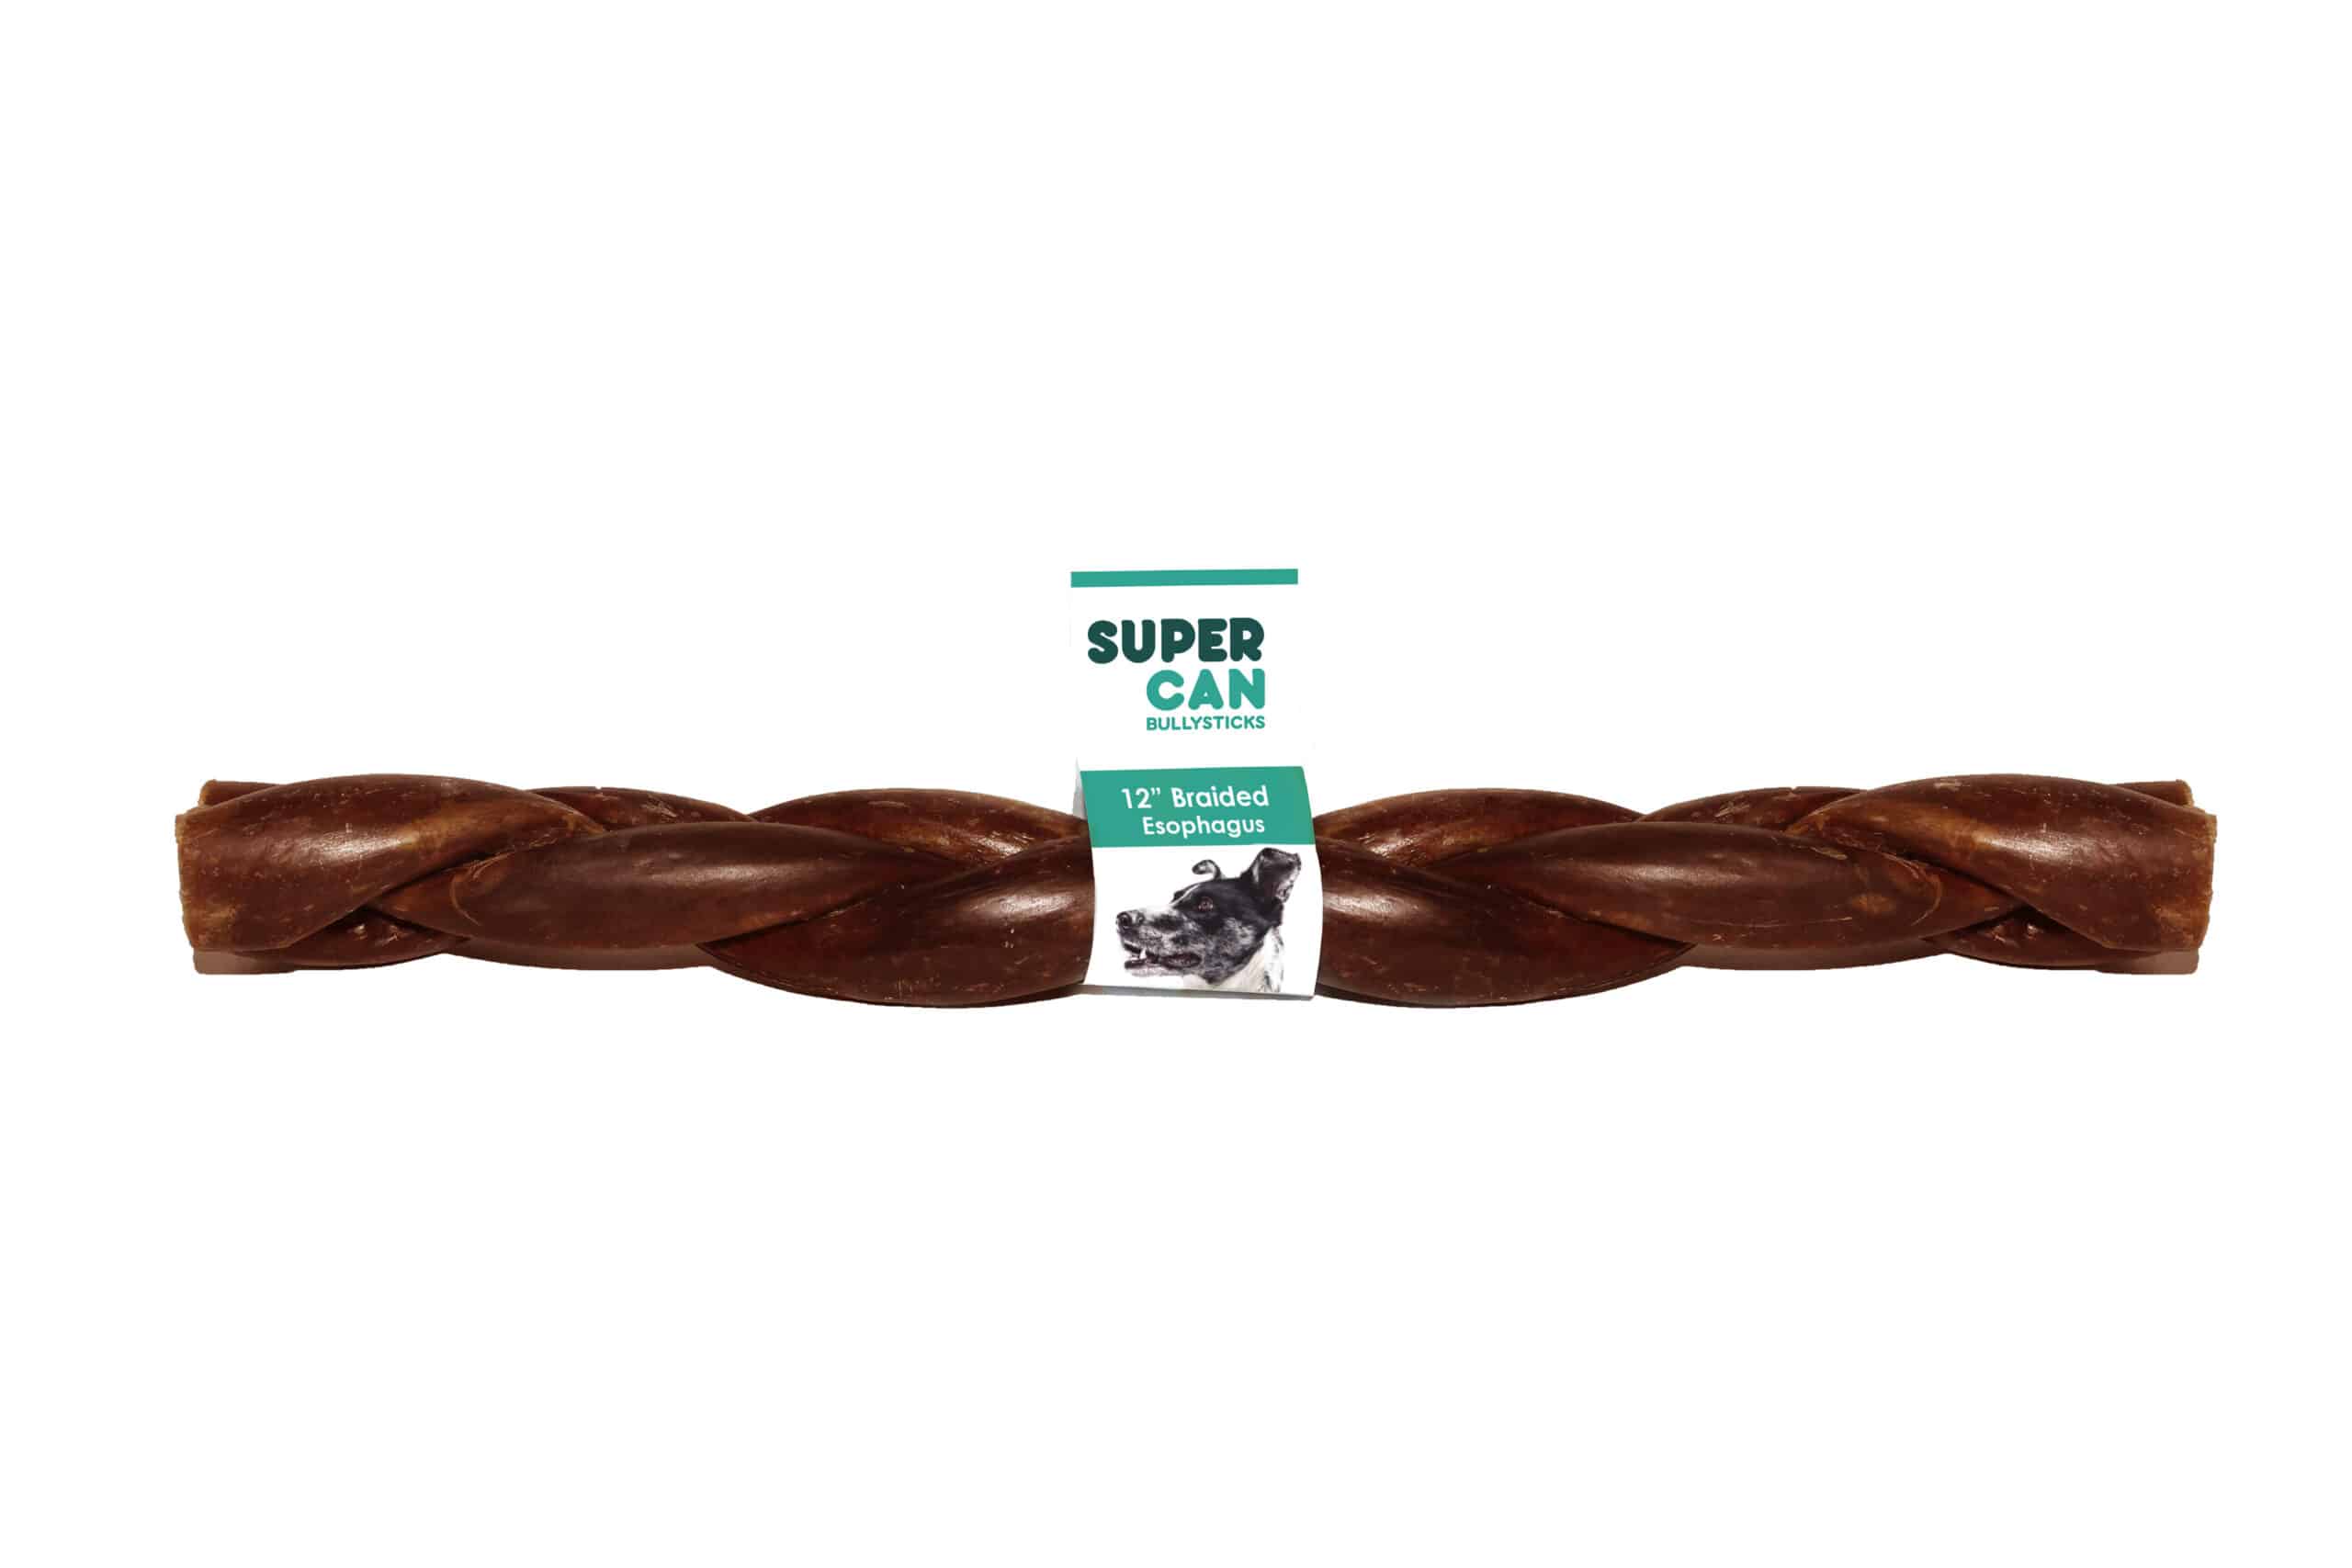 Super Can braided beef dog chew